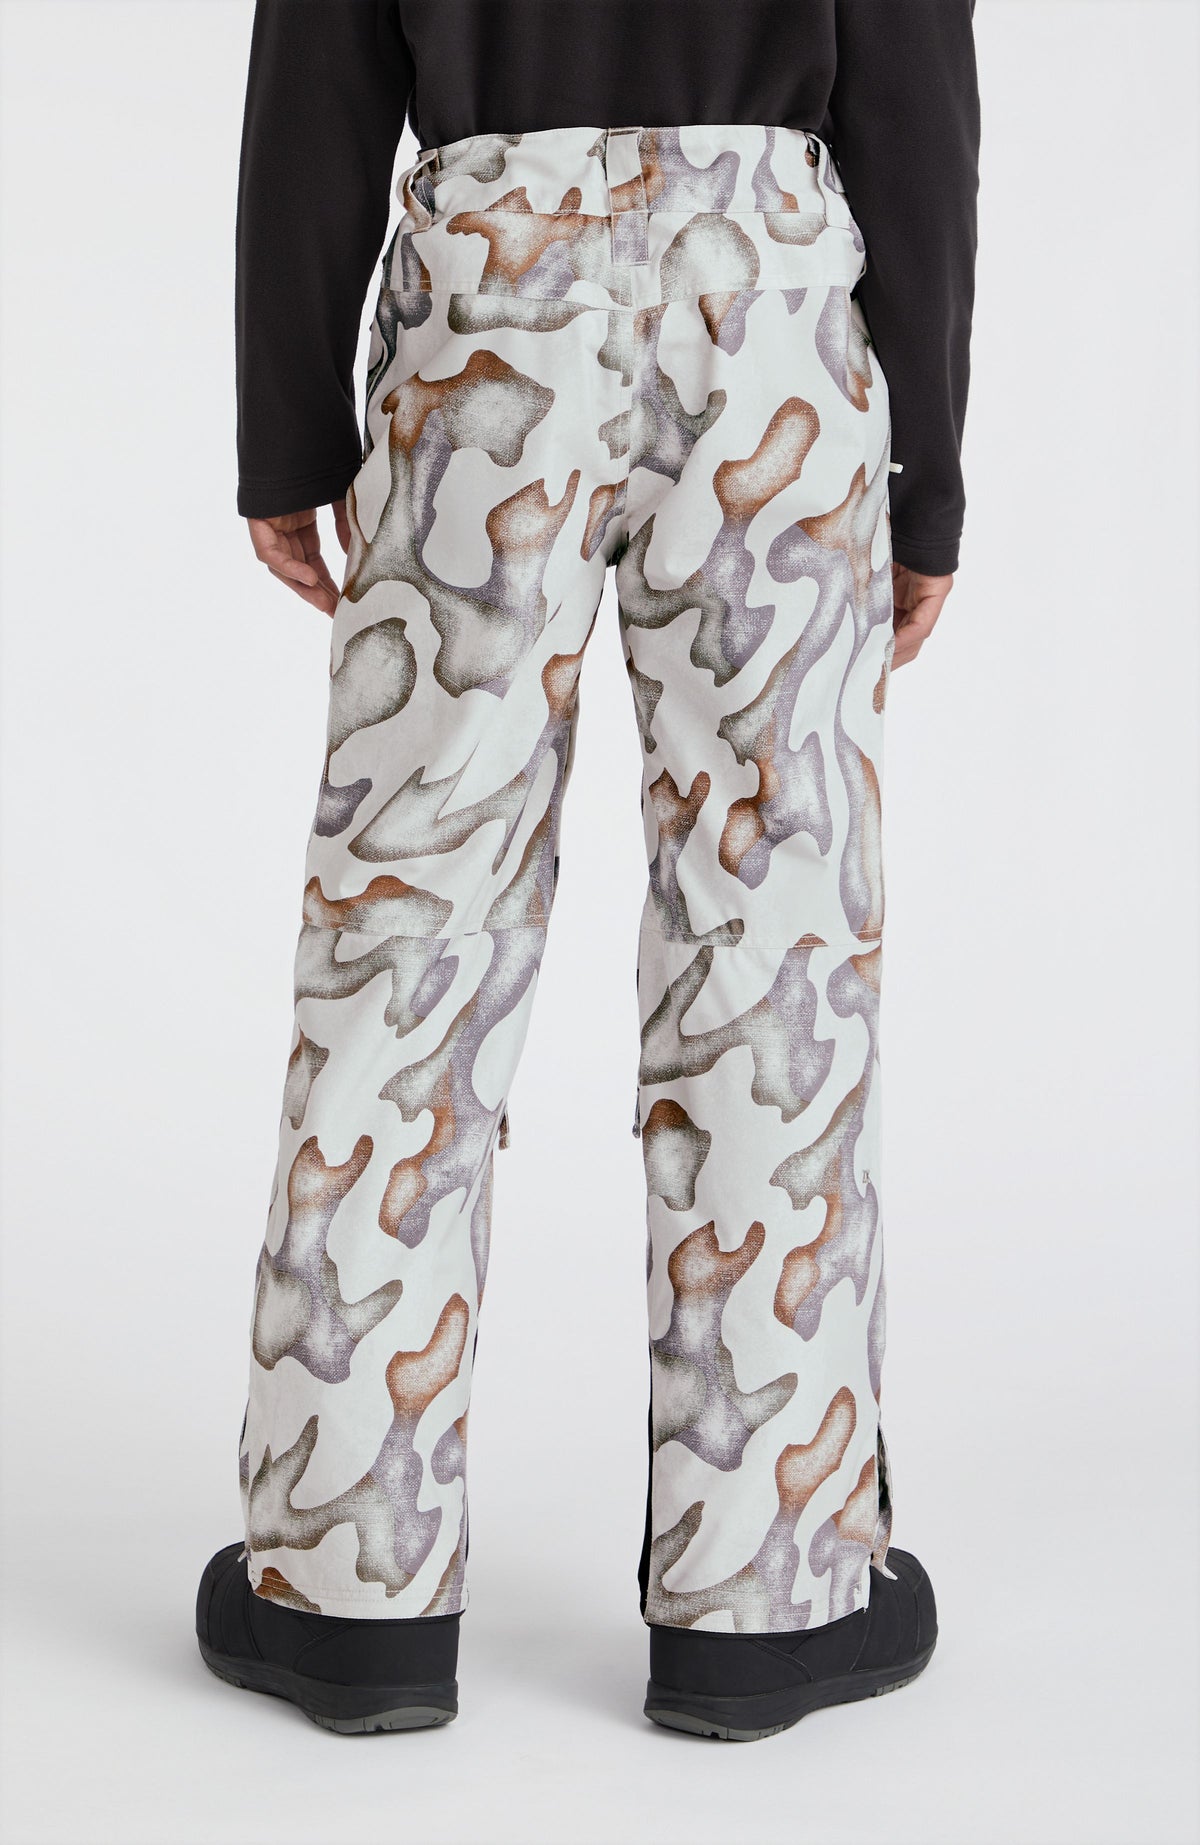 Shop for Camouflage Pants for Outdoor Sports at